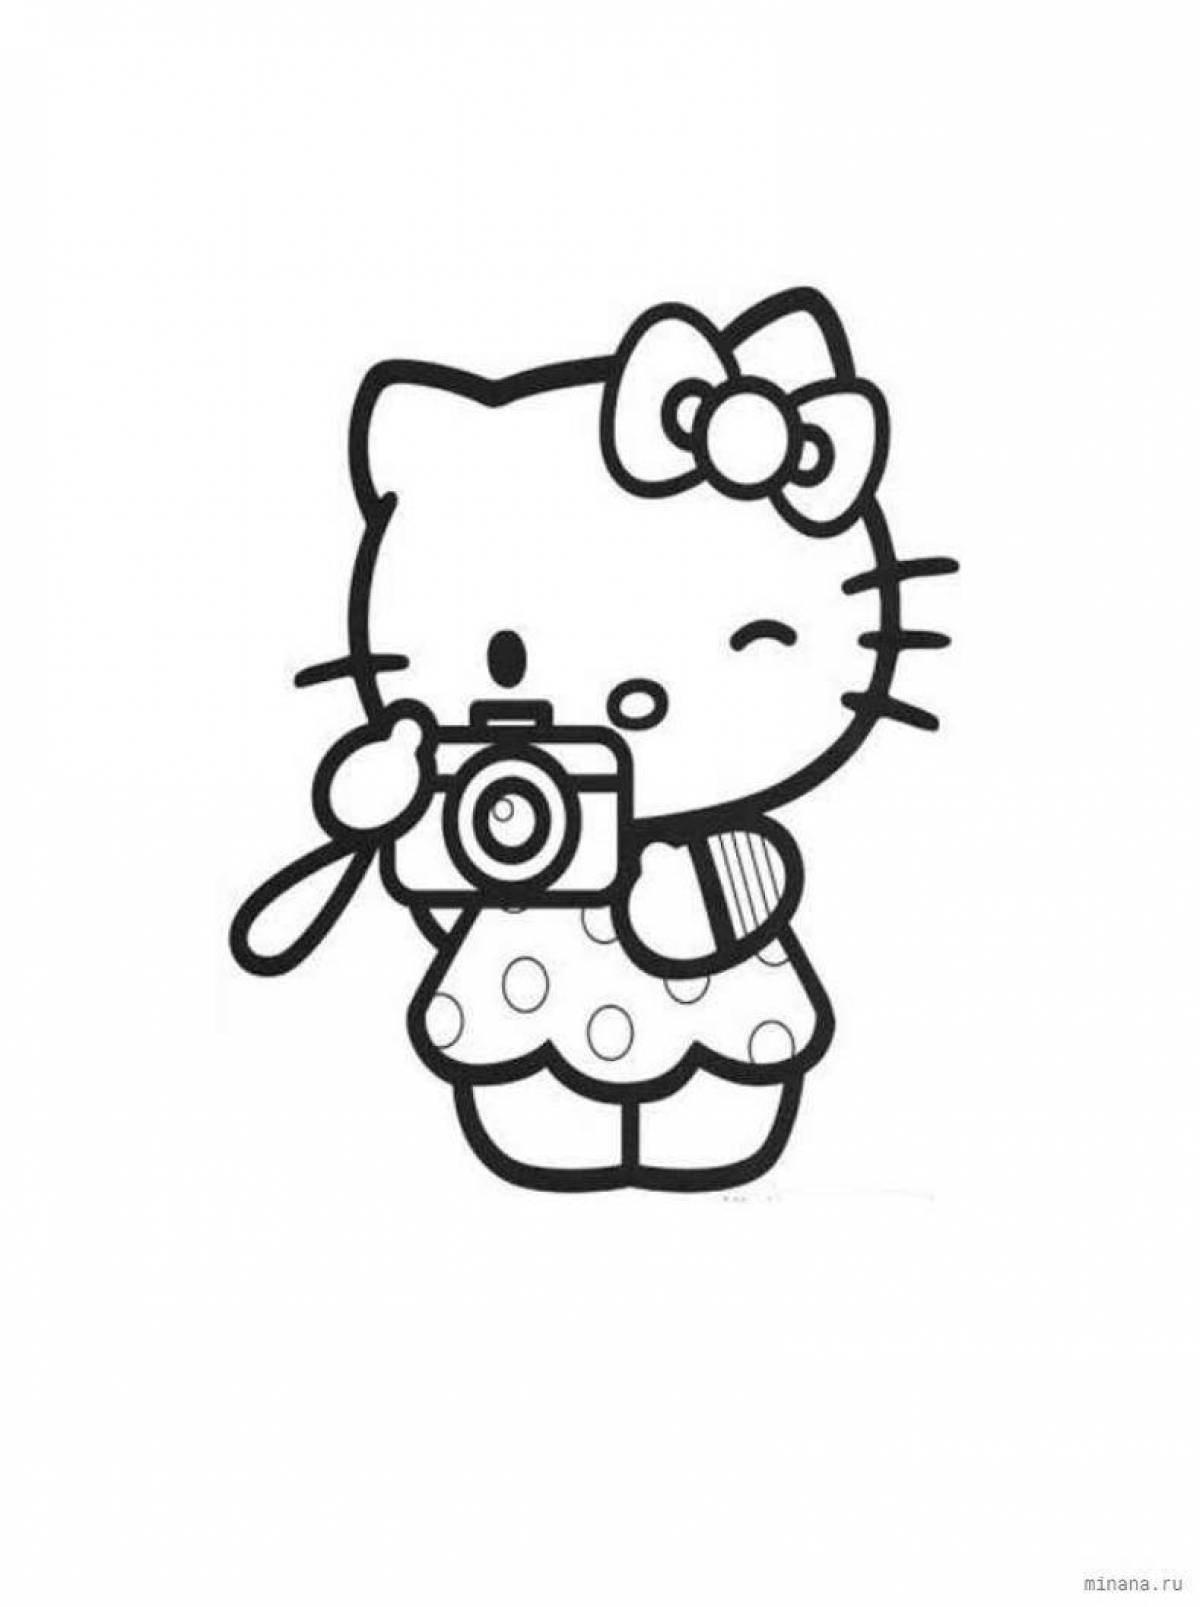 Exciting hello kitty anime coloring book